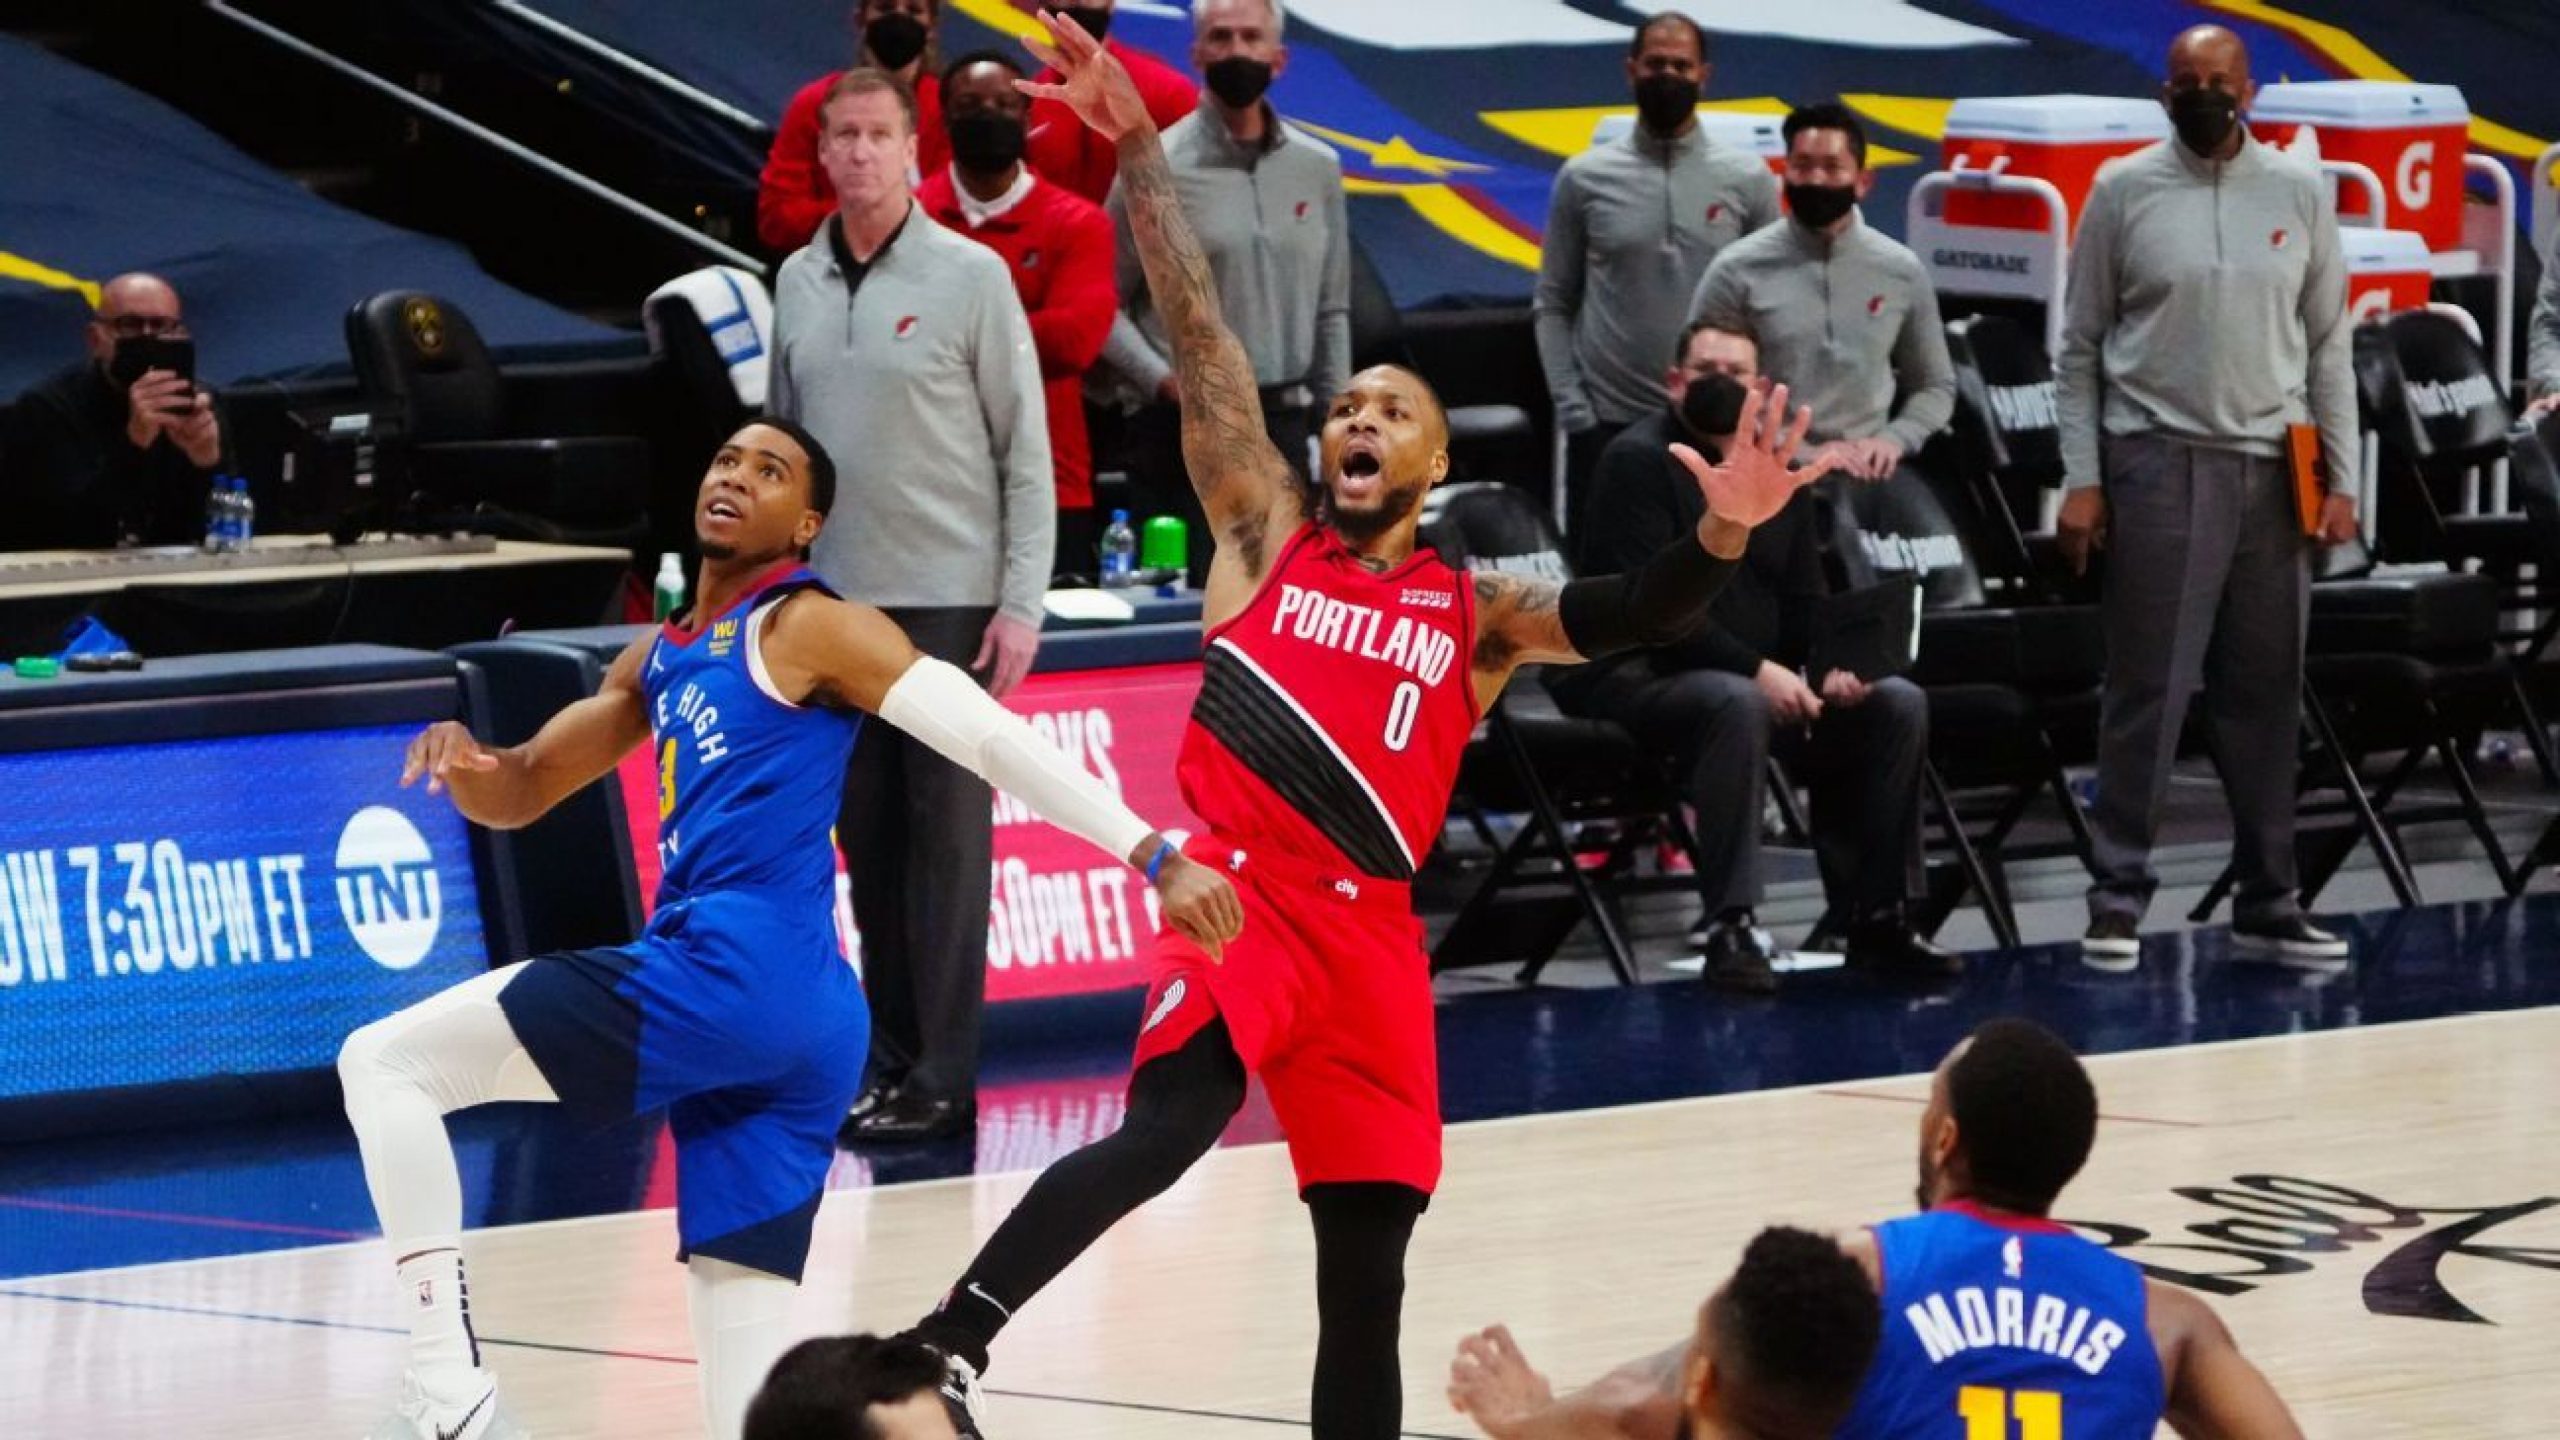 Social media responds to Dame’s record-setting Game 5 performance